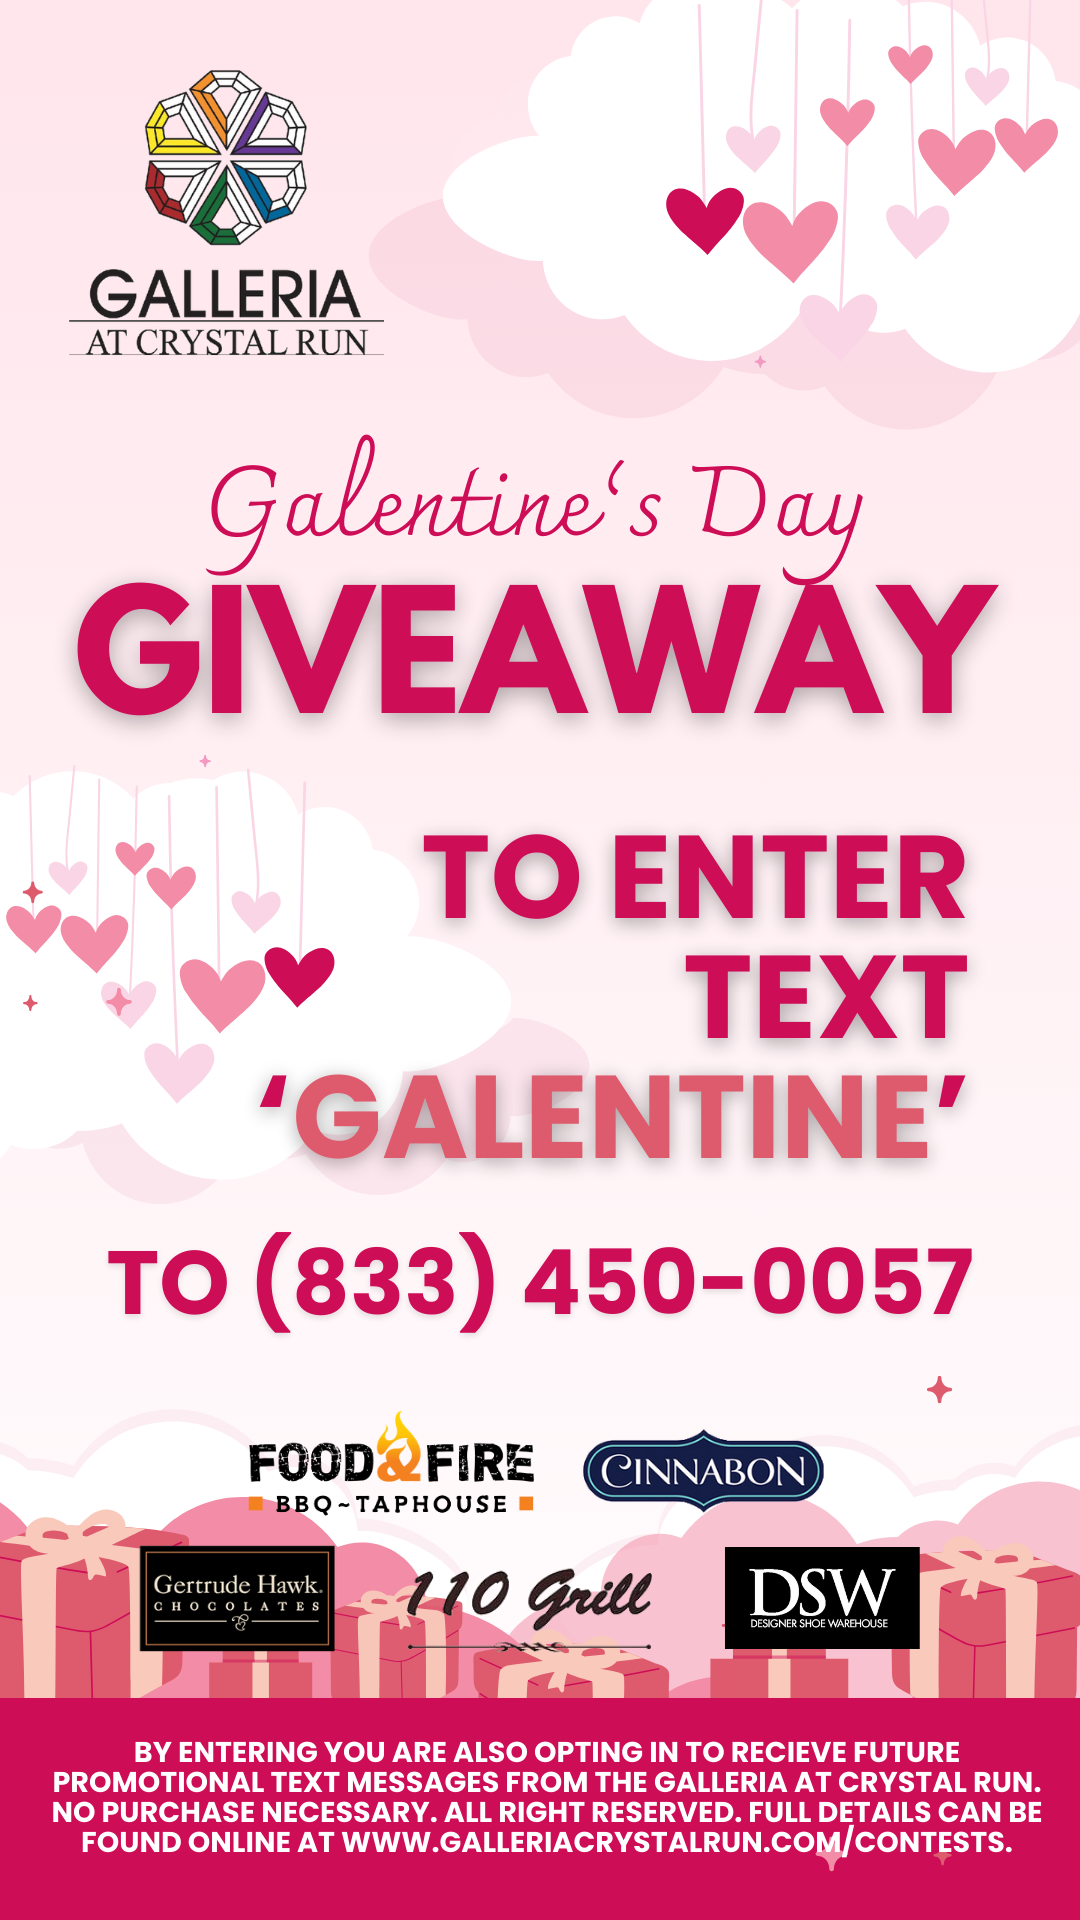 GALENTINES DAY GIVEAWAY 1080 x 1920 px 2